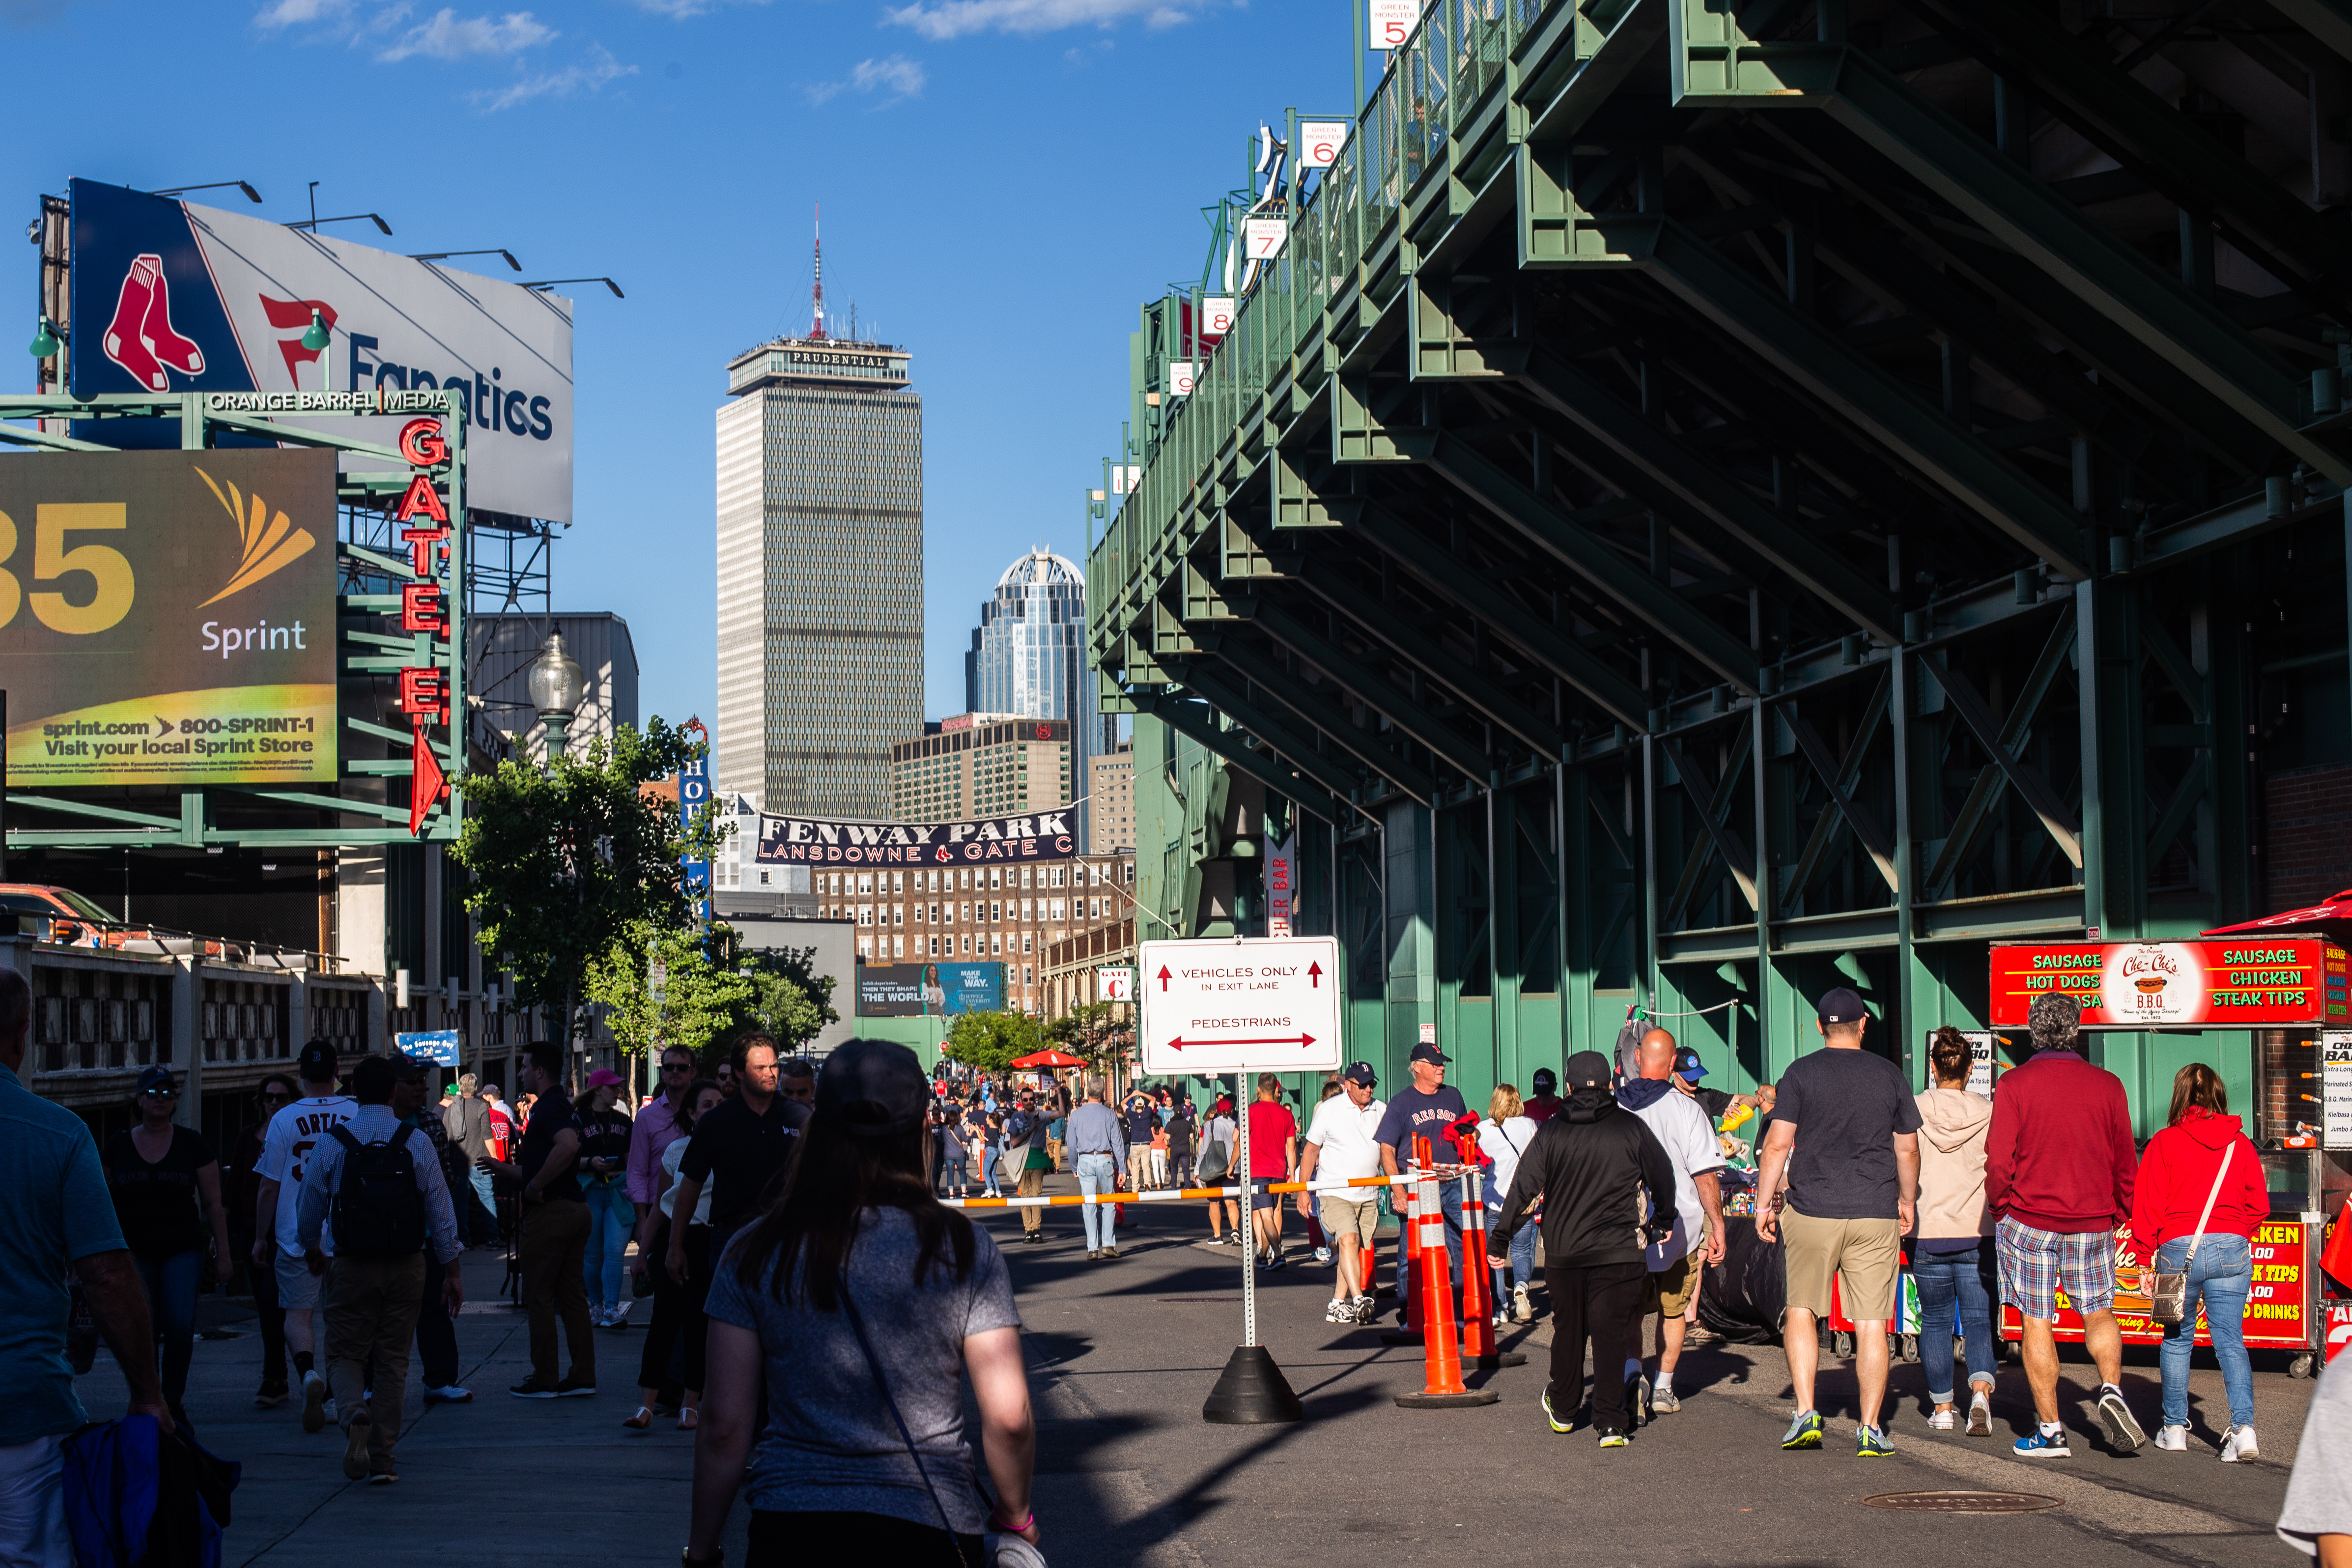 Ranking The Large Fenway Park Advertisements of The 21st Century